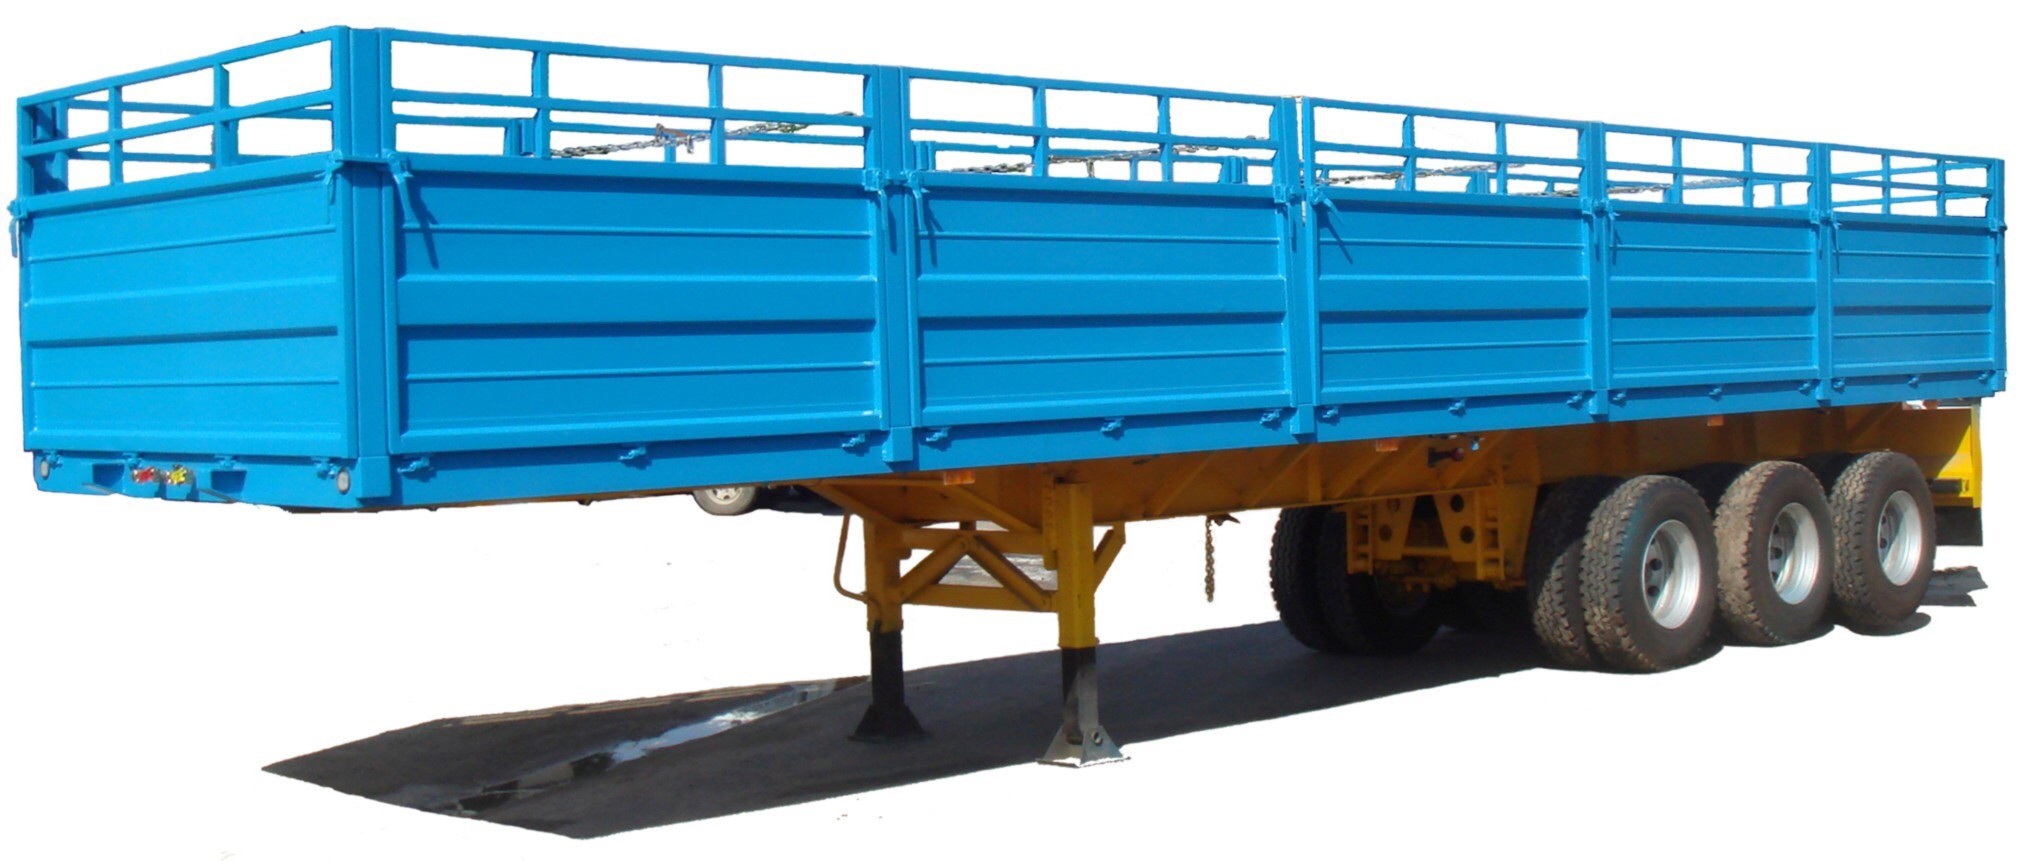 China 13m 45T 3 axles Port terminal container flat bed semi trailer with 600mm side walls and double tires-9453 wholesale